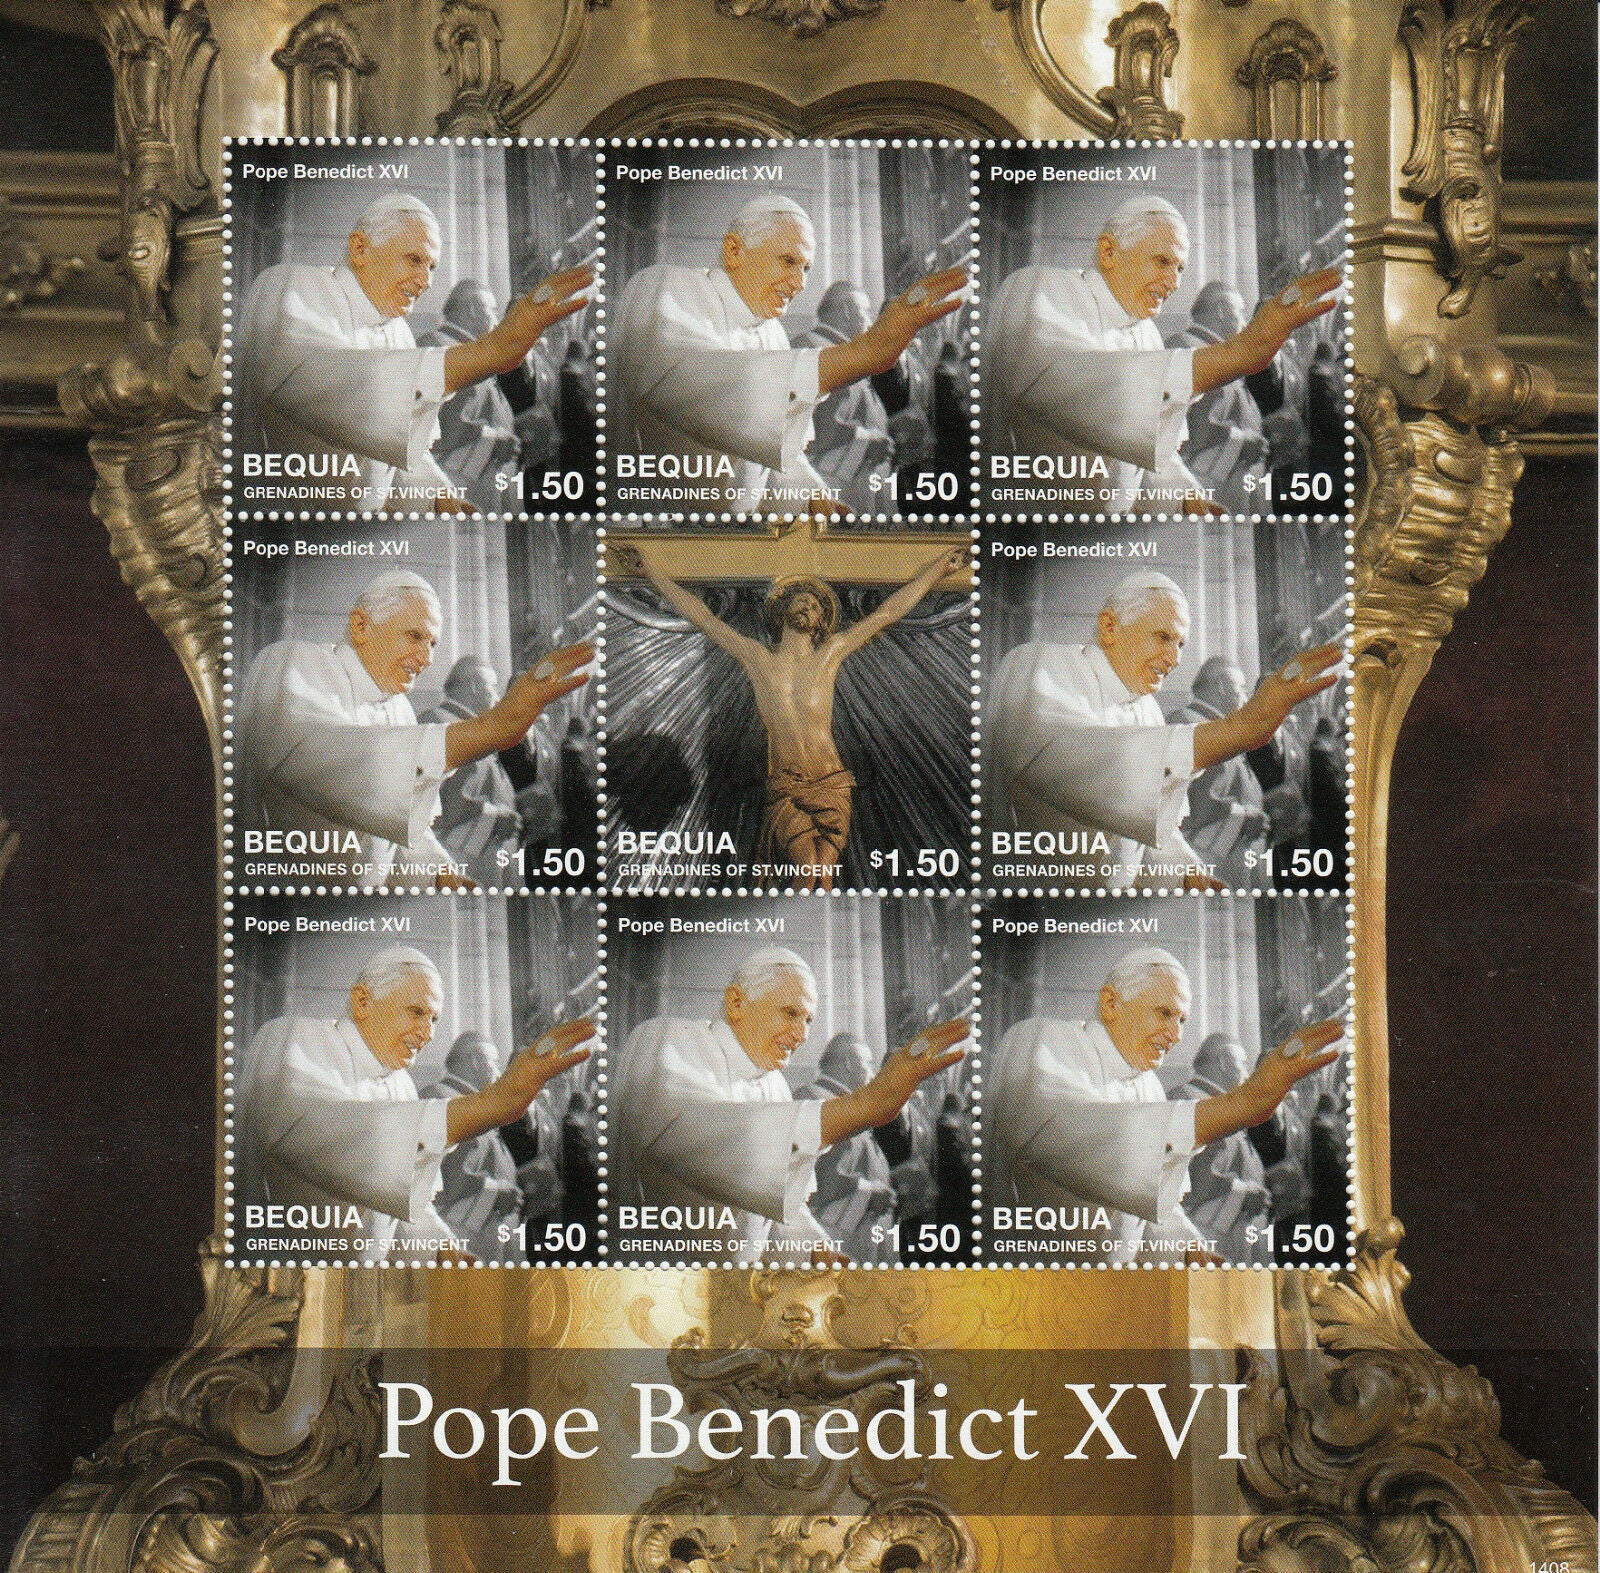 Bequia Grenadines St Vincent Popes Stamps 2014 MNH Pope Benedict XVI 9v M/S II